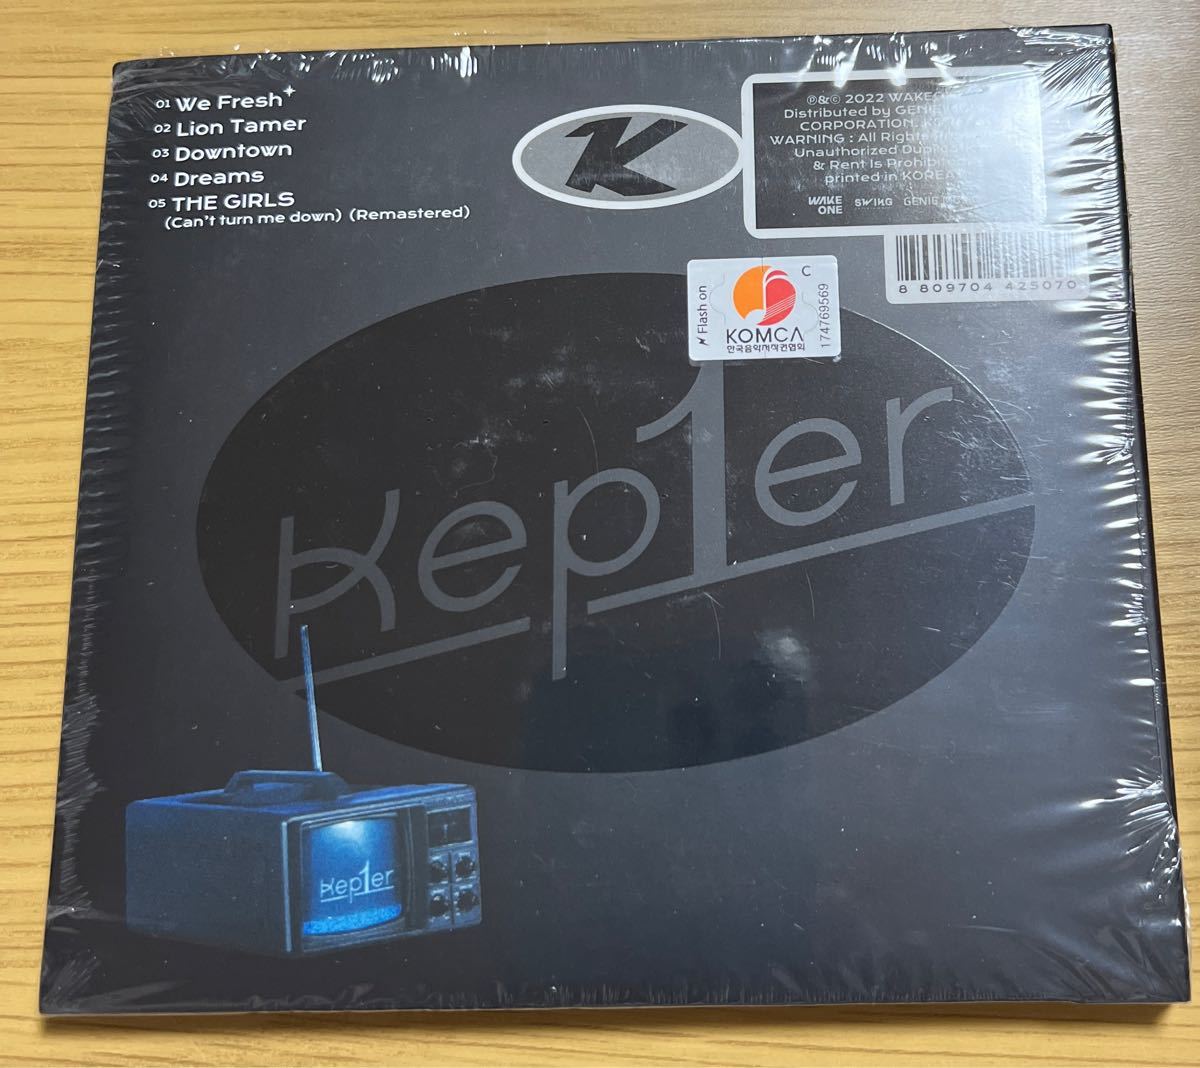 kep1er troubleshooter デジパック チェヒョン CD セット